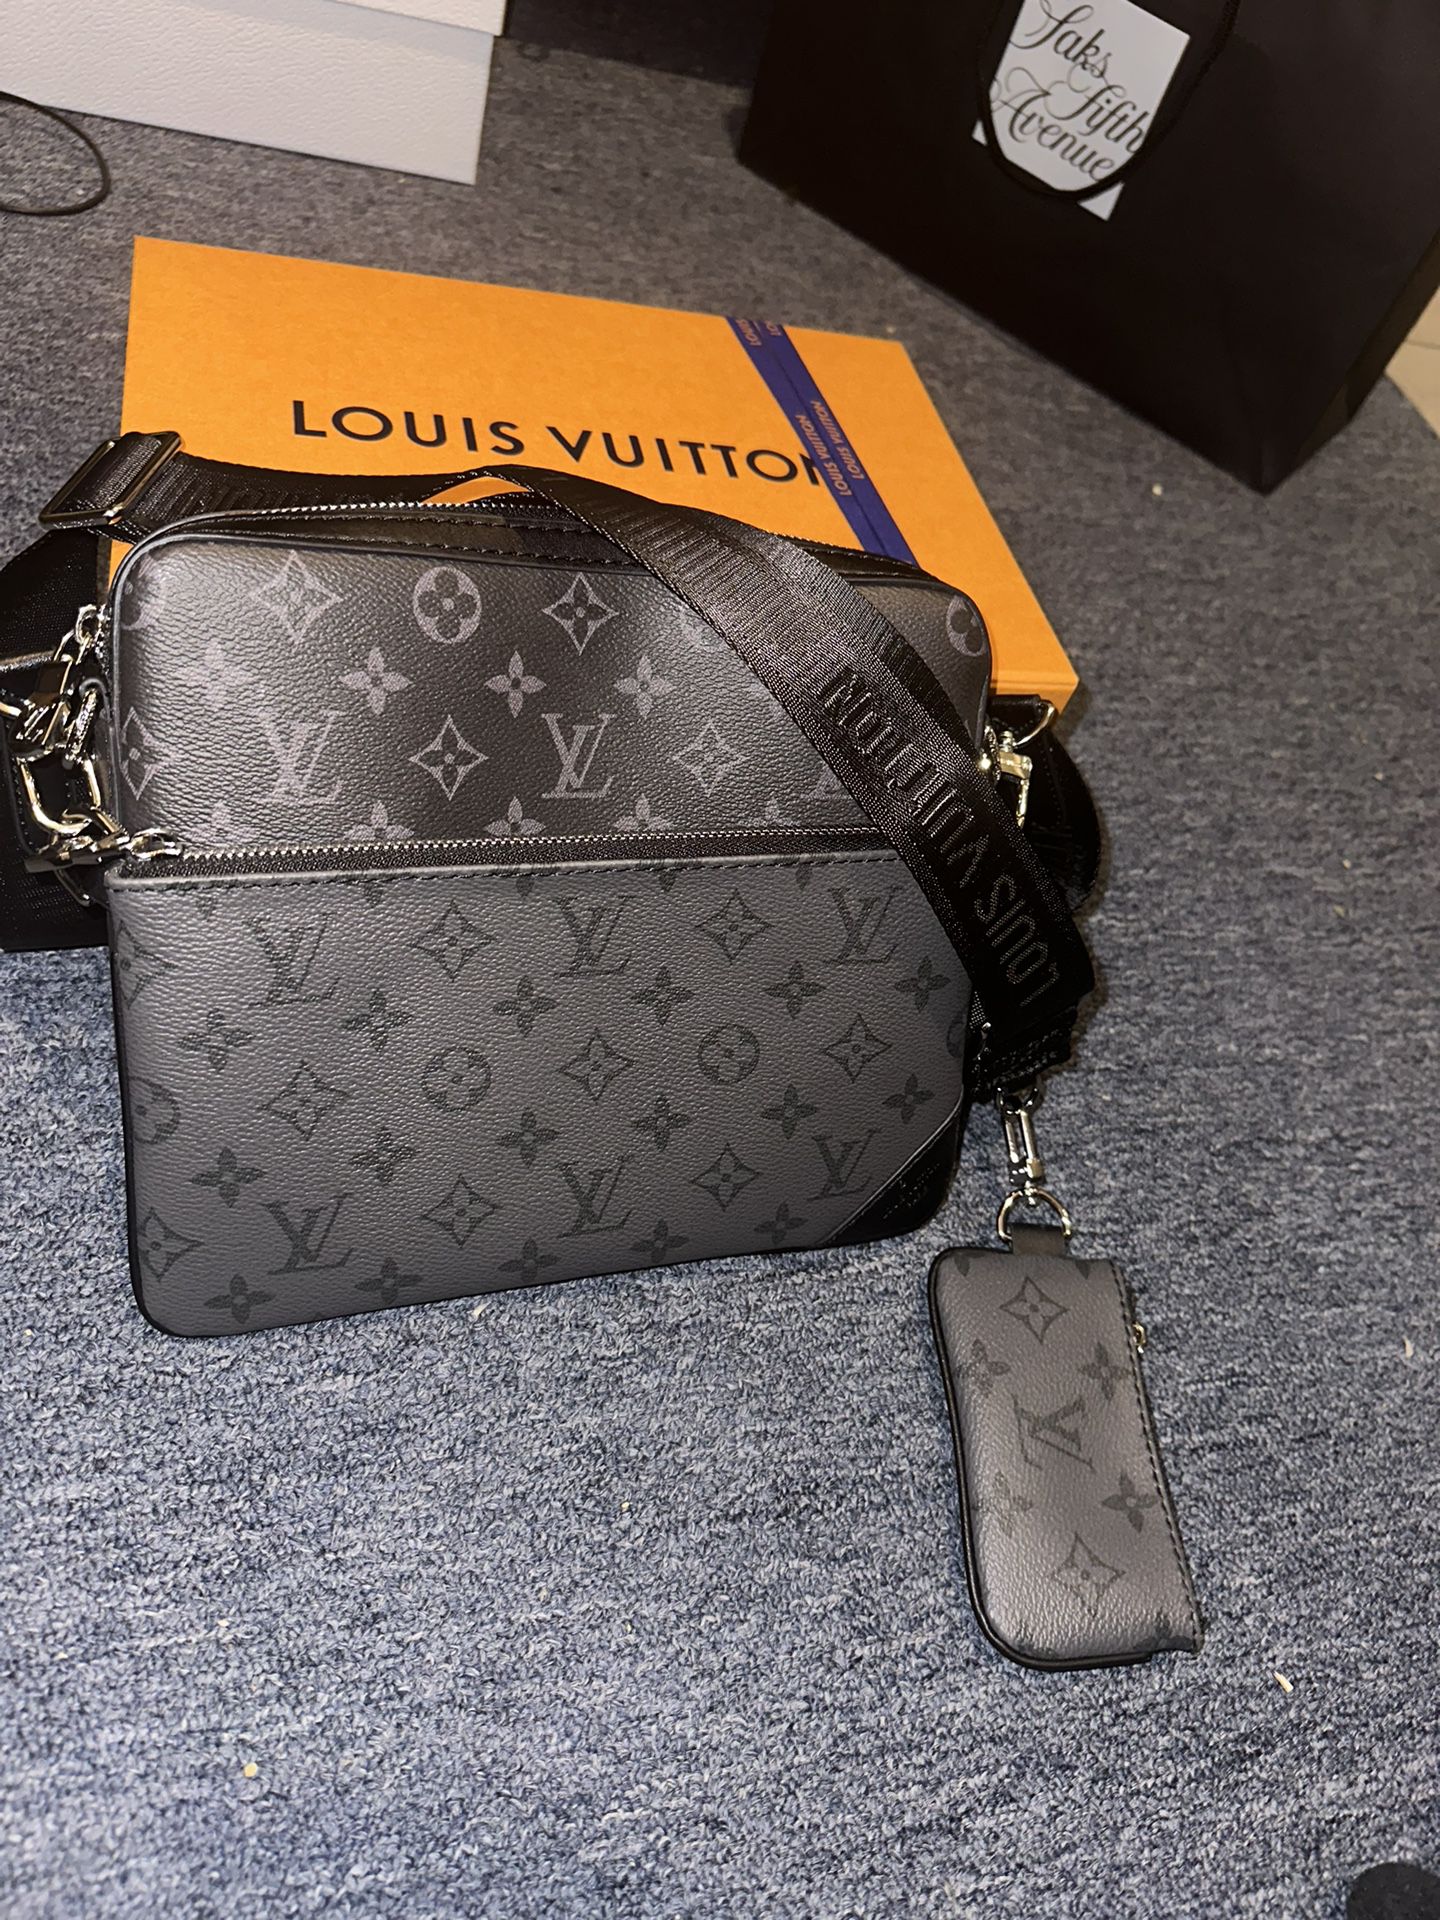 Certified Louis Vuitton Crossbag for Sale in Kissimmee, FL - OfferUp